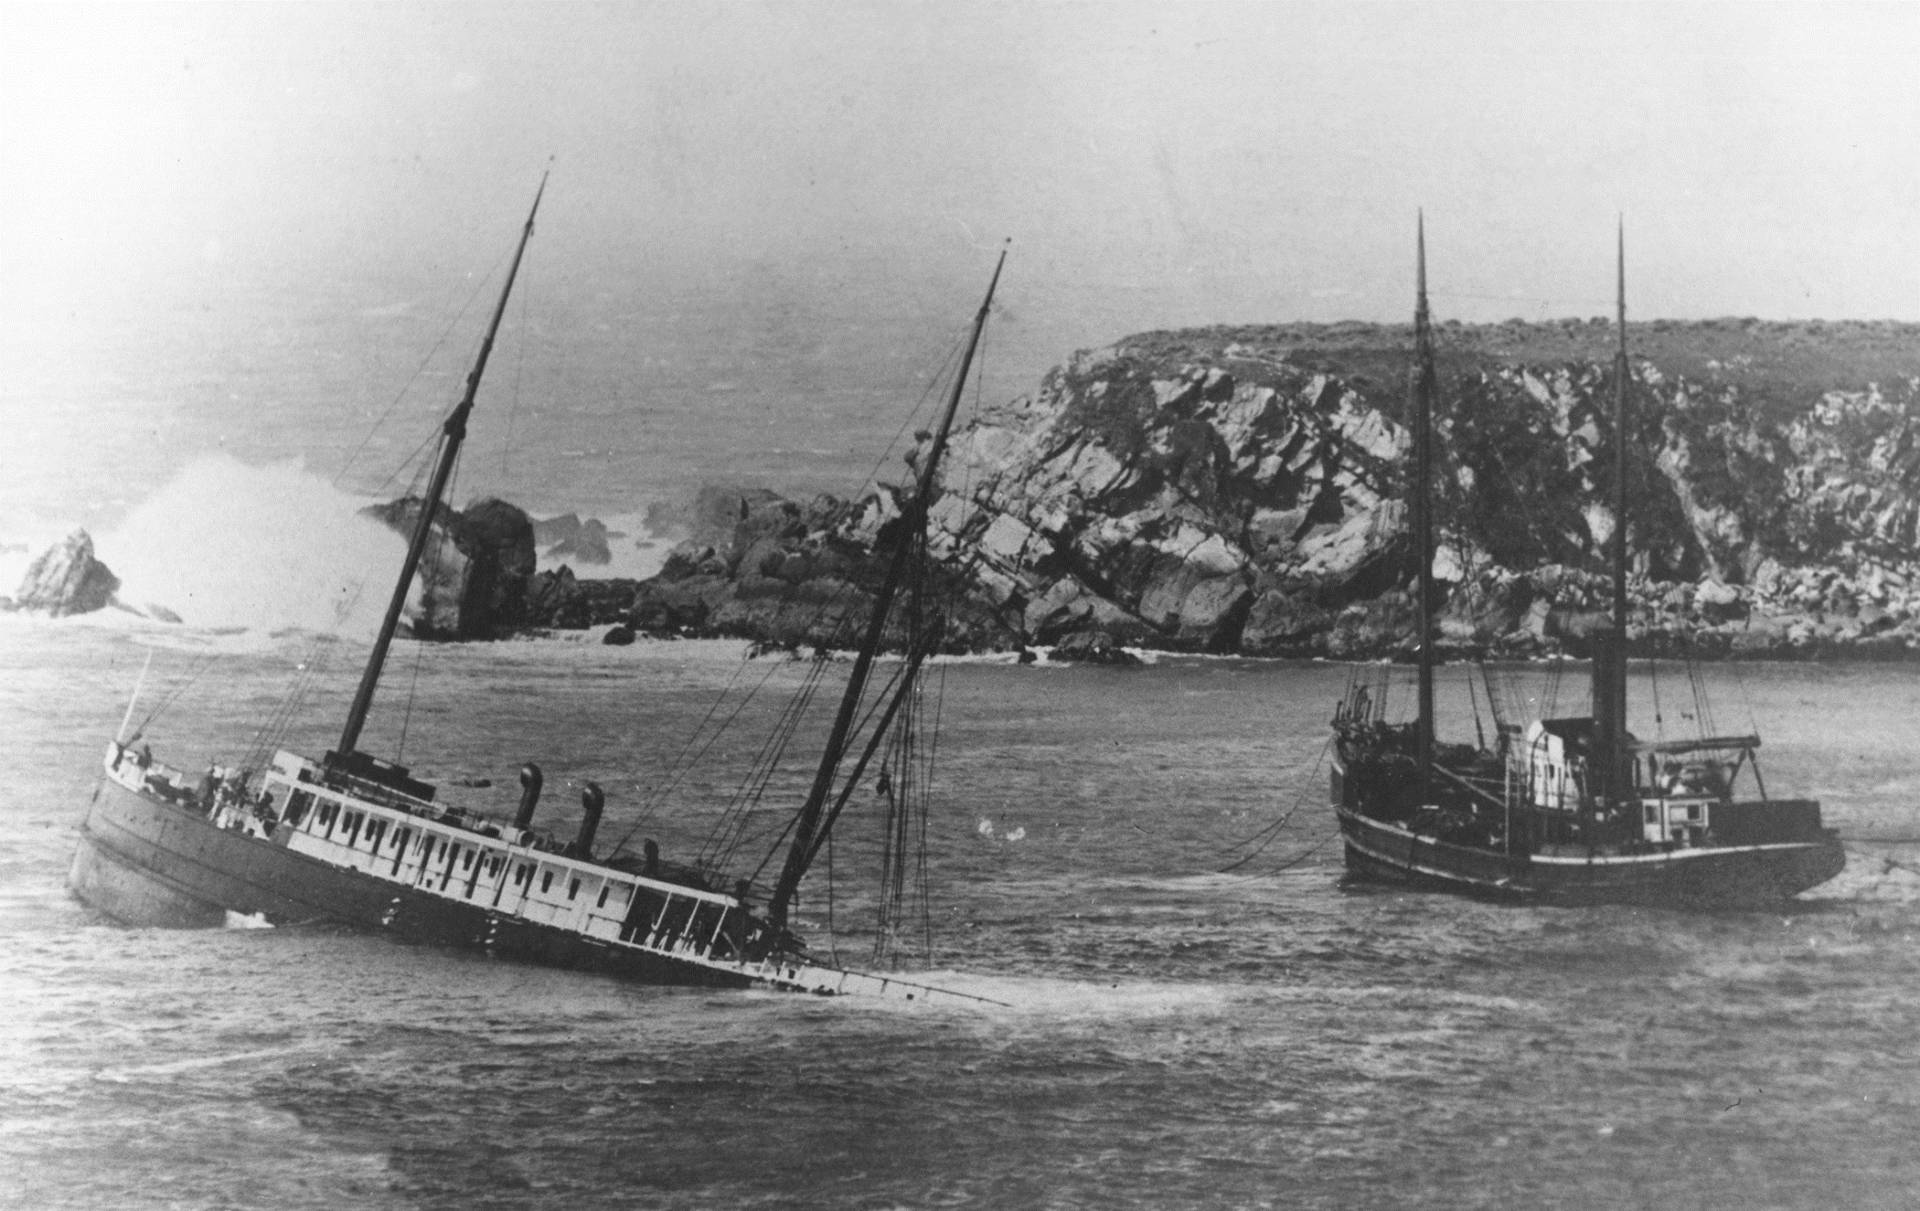 The 225-foot long steel-hulled coastal steamship Pomona sinks off Fort Ross cove on March 17, 1908 after hitting a submerged pinnacle.  Fort Ross Conservancy